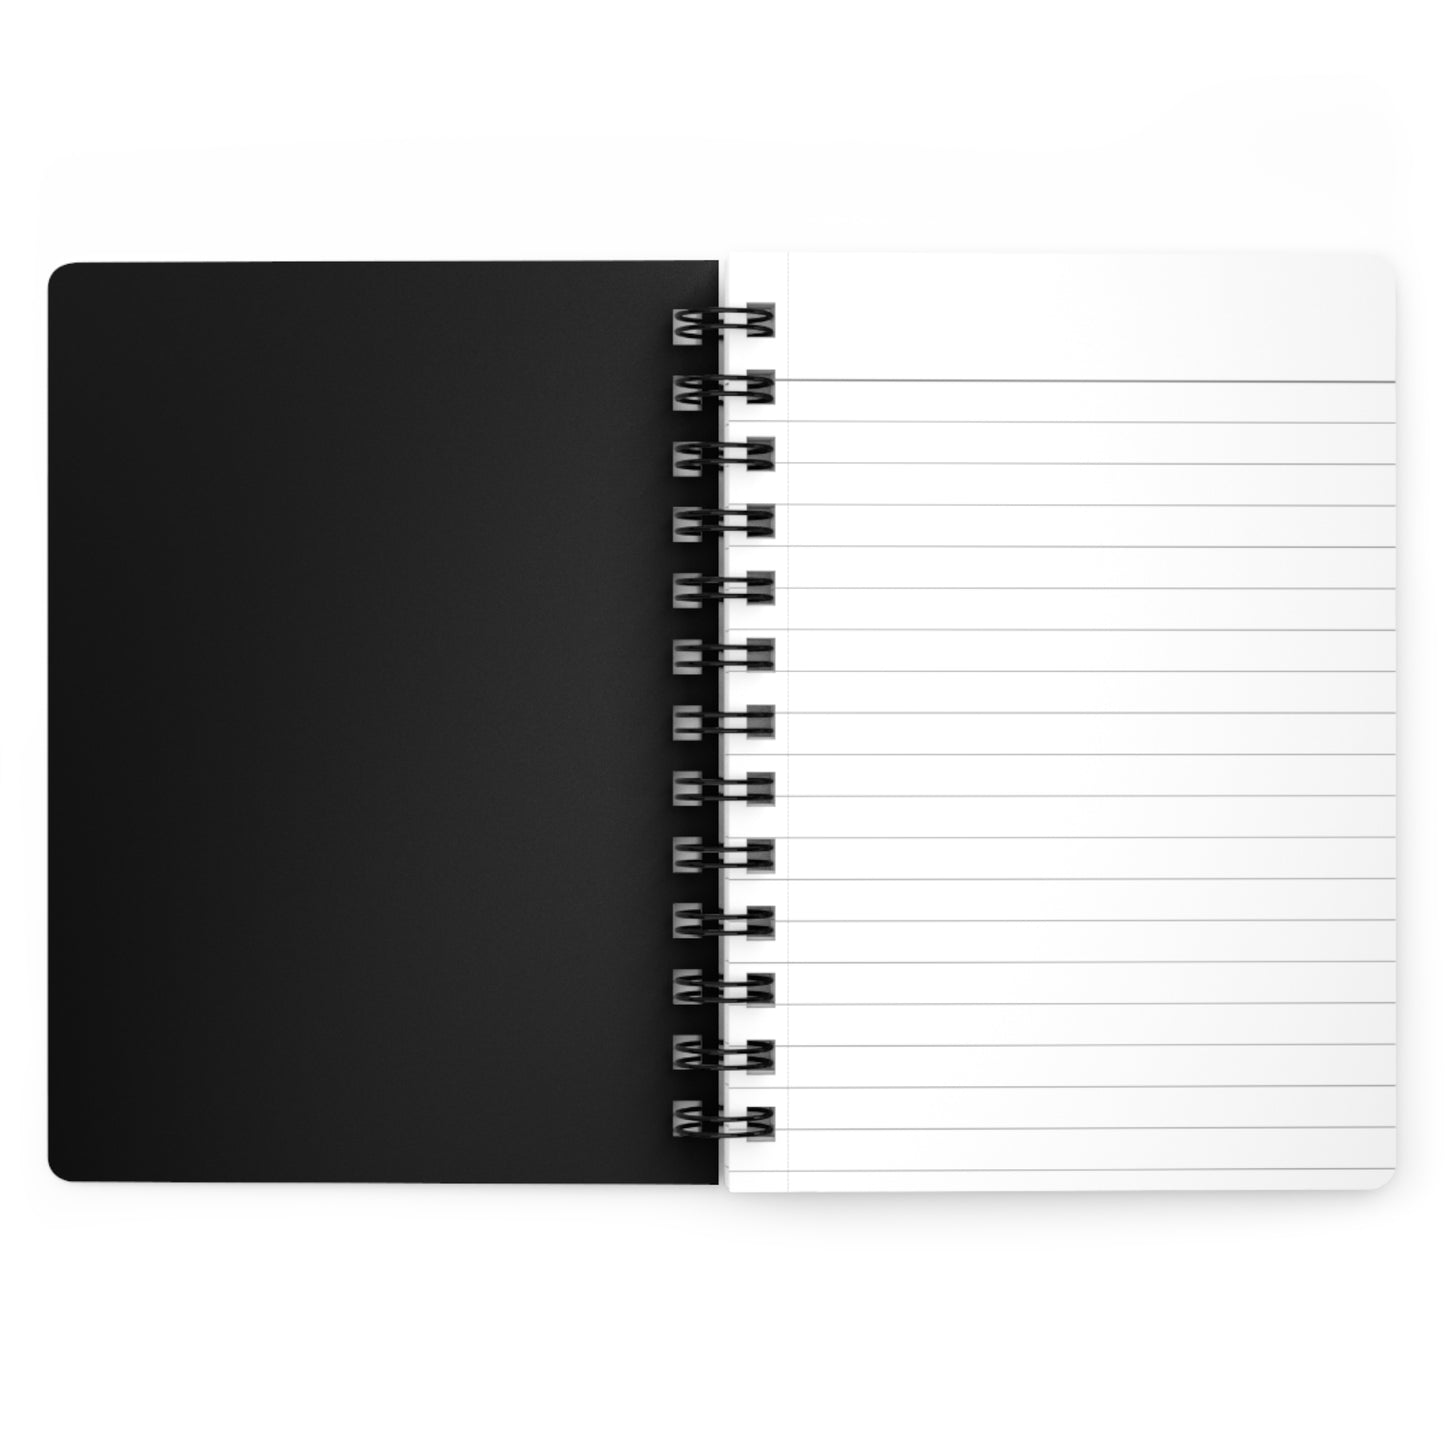 The Rules Spiral Bound Notebook